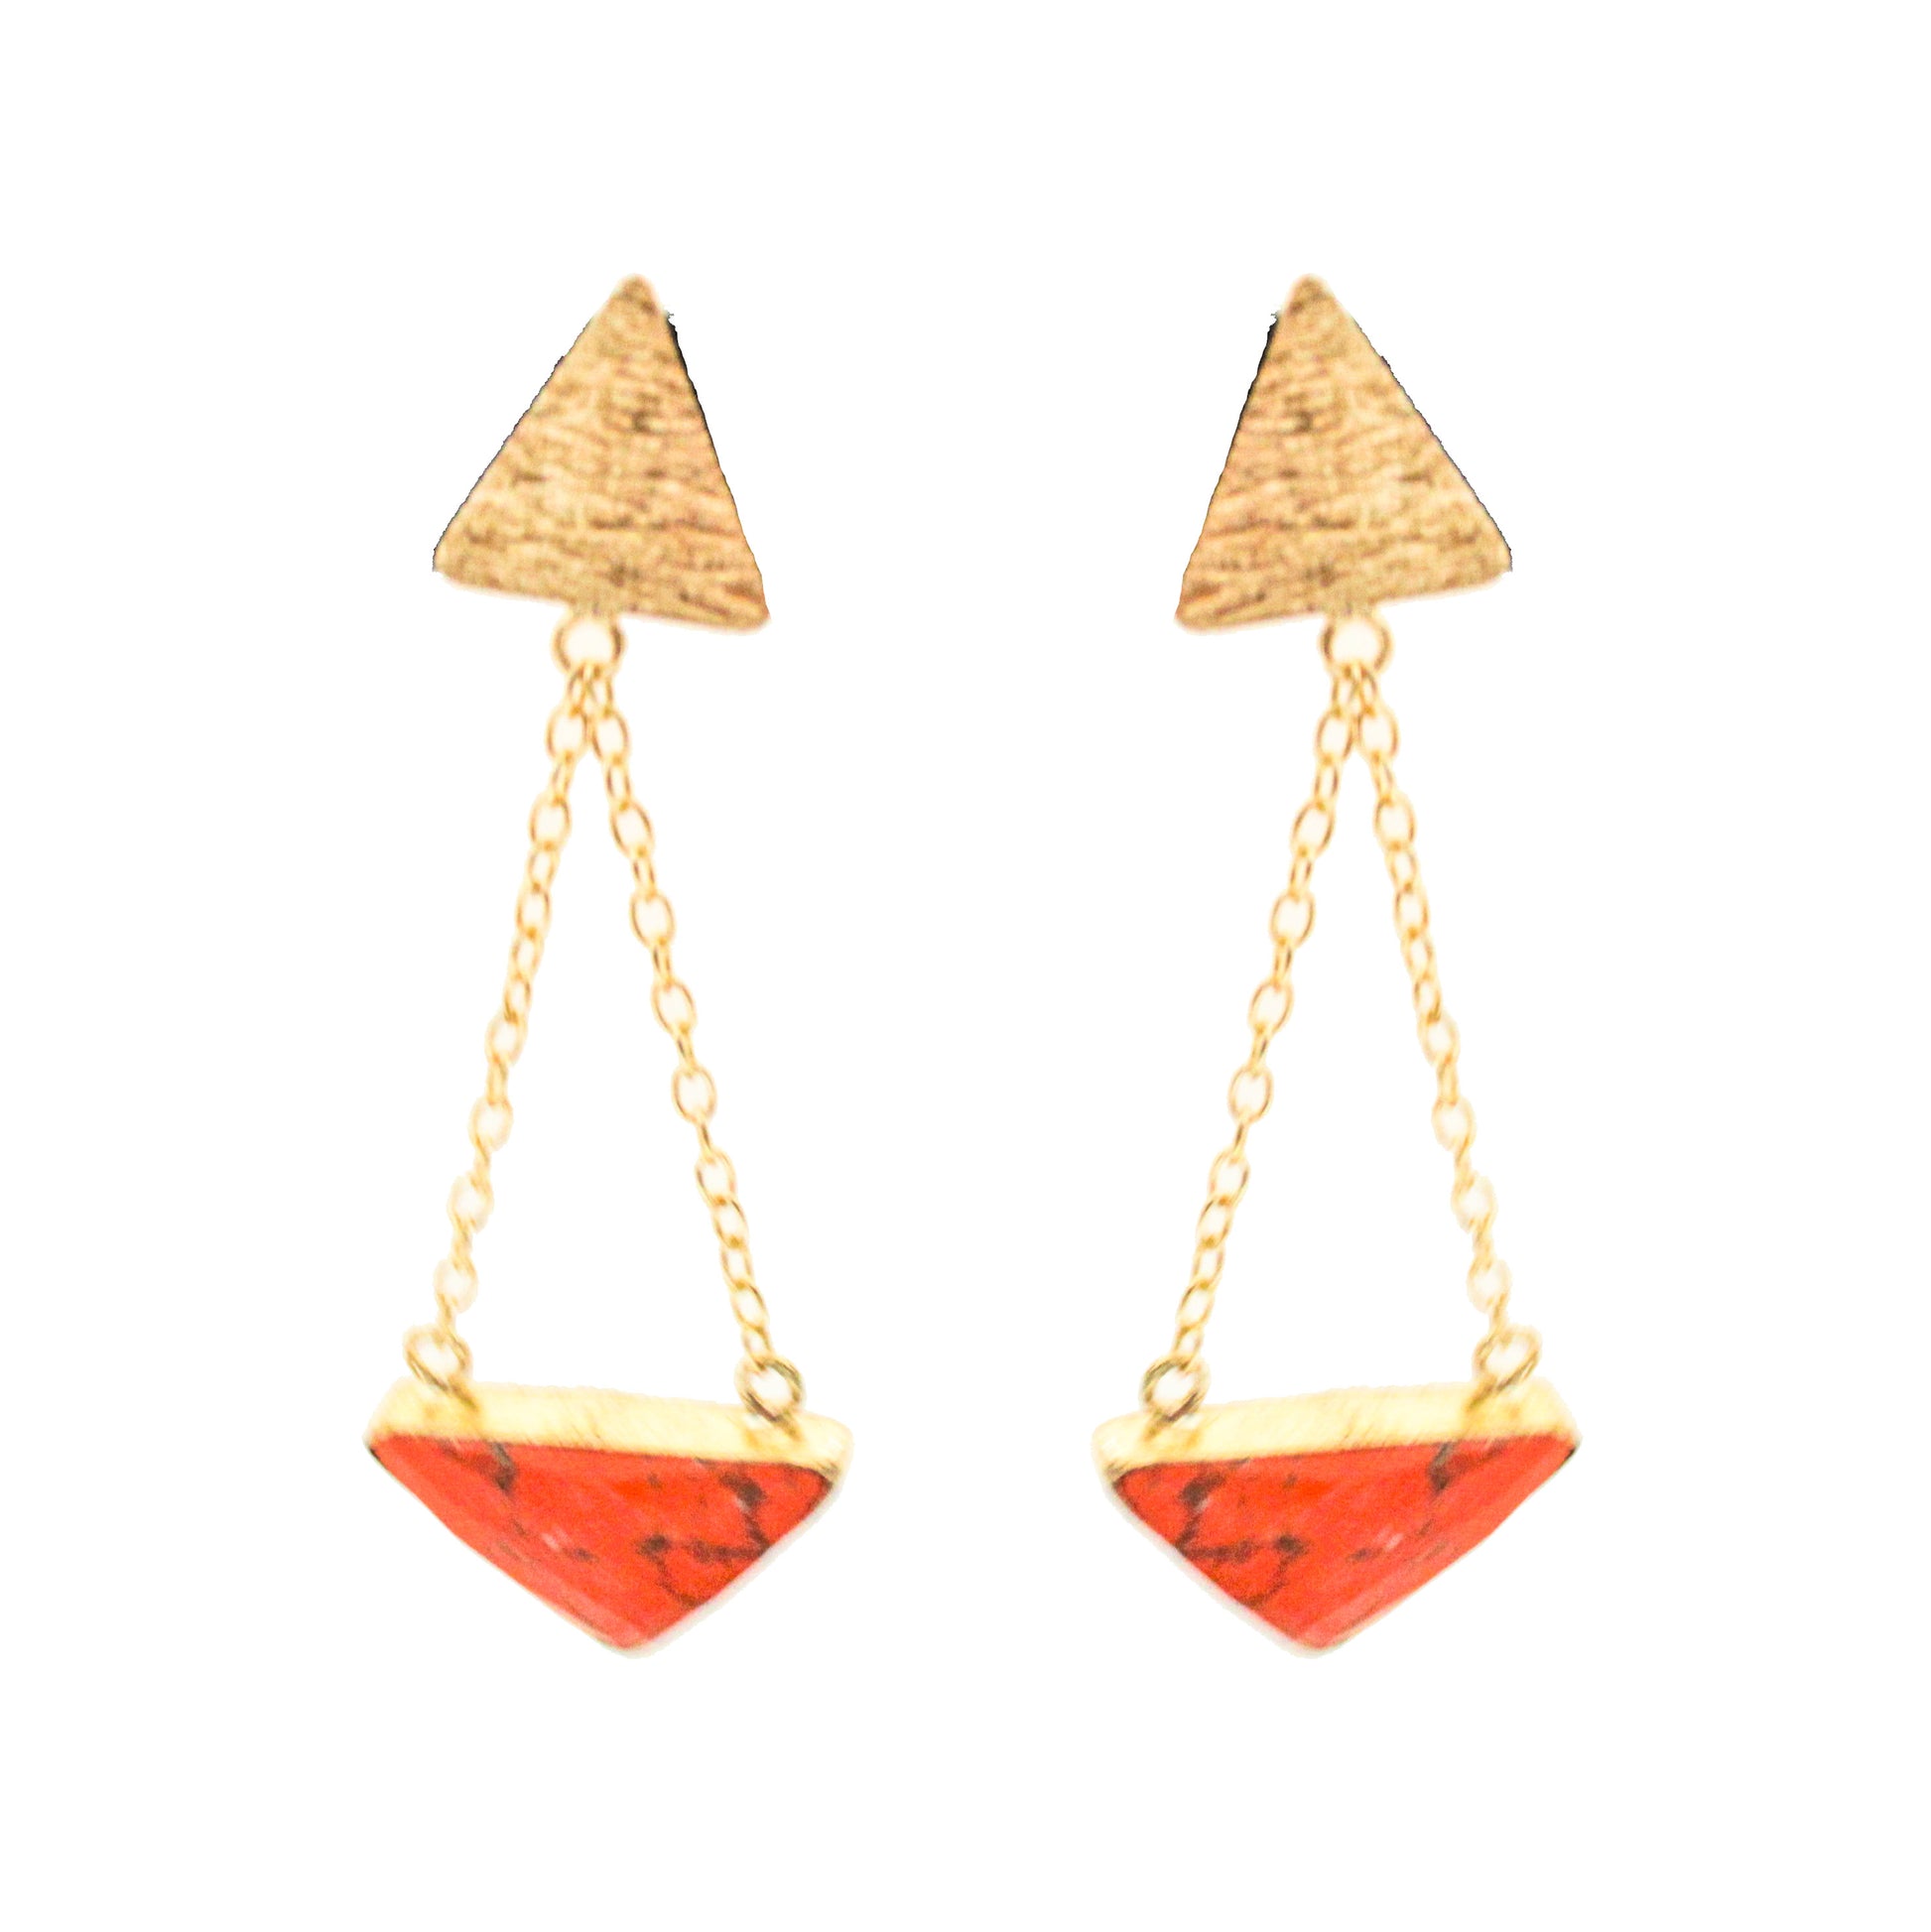 Gold and orange minimal earring - The Bling Girll